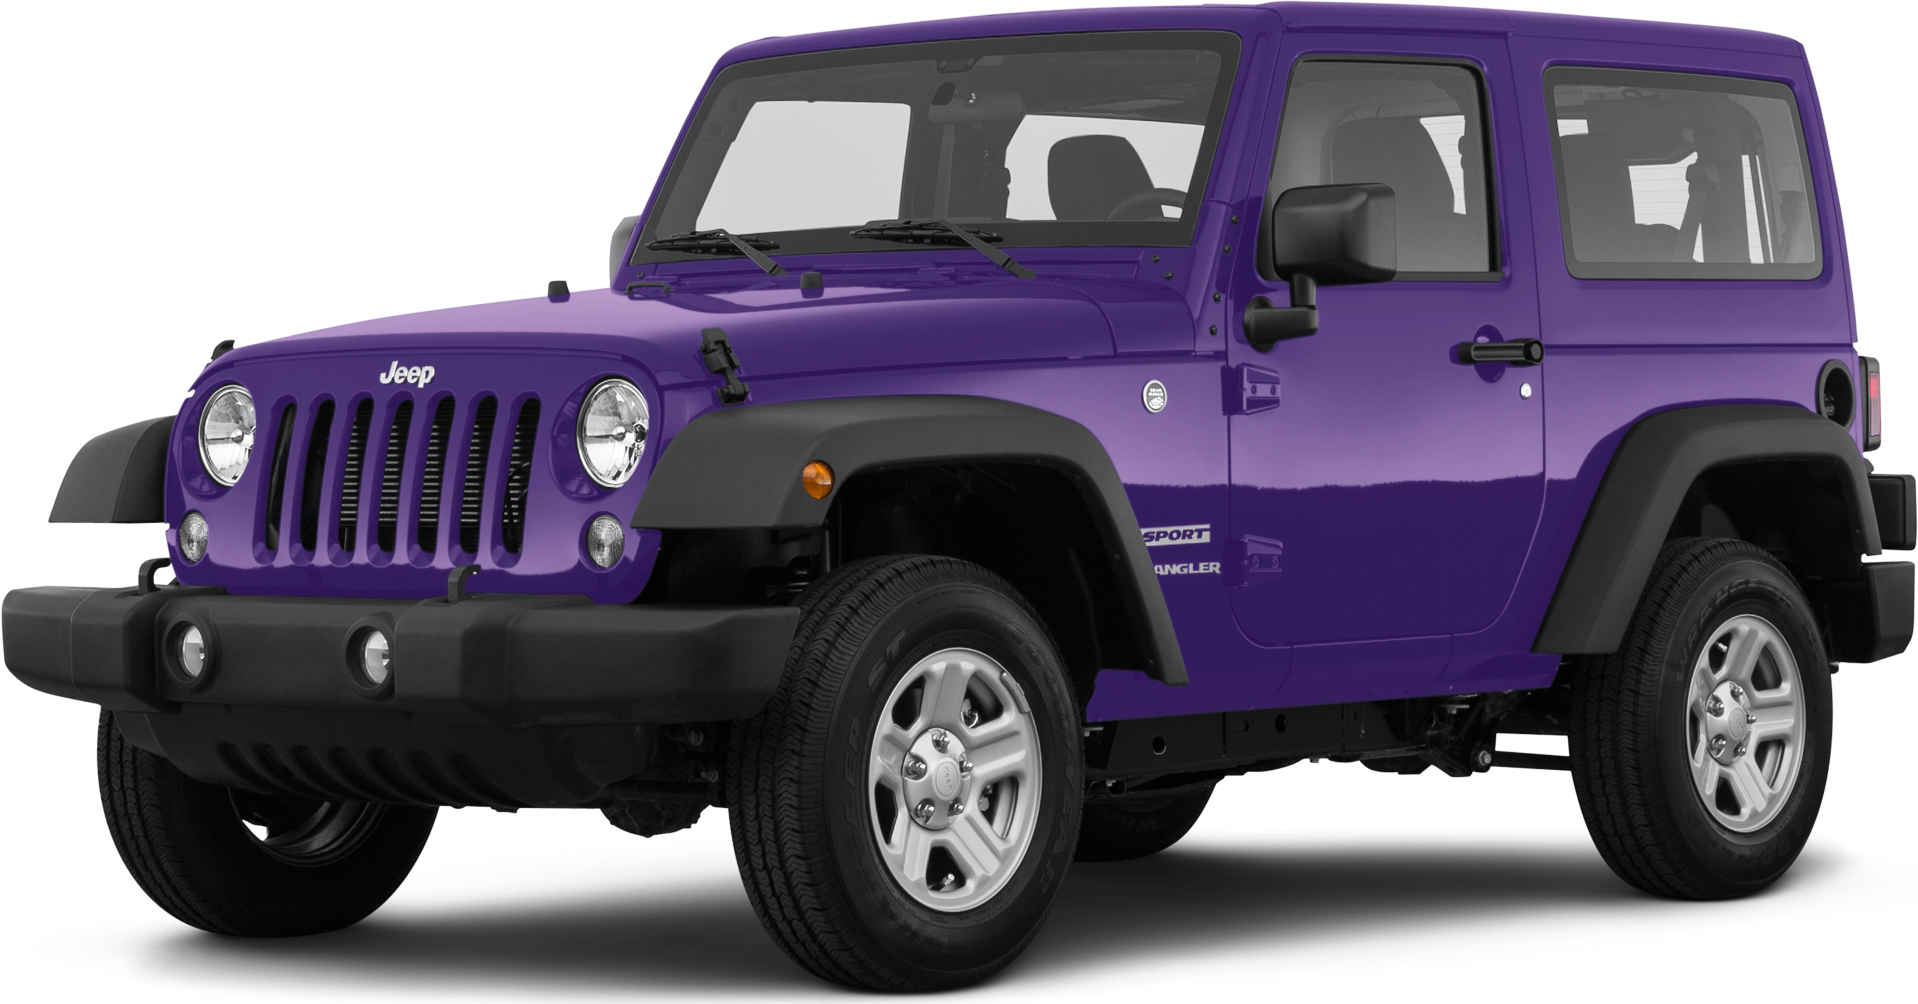 2018 Jeep Wrangler Unlimited Values & Cars for Sale | Kelley Blue Book